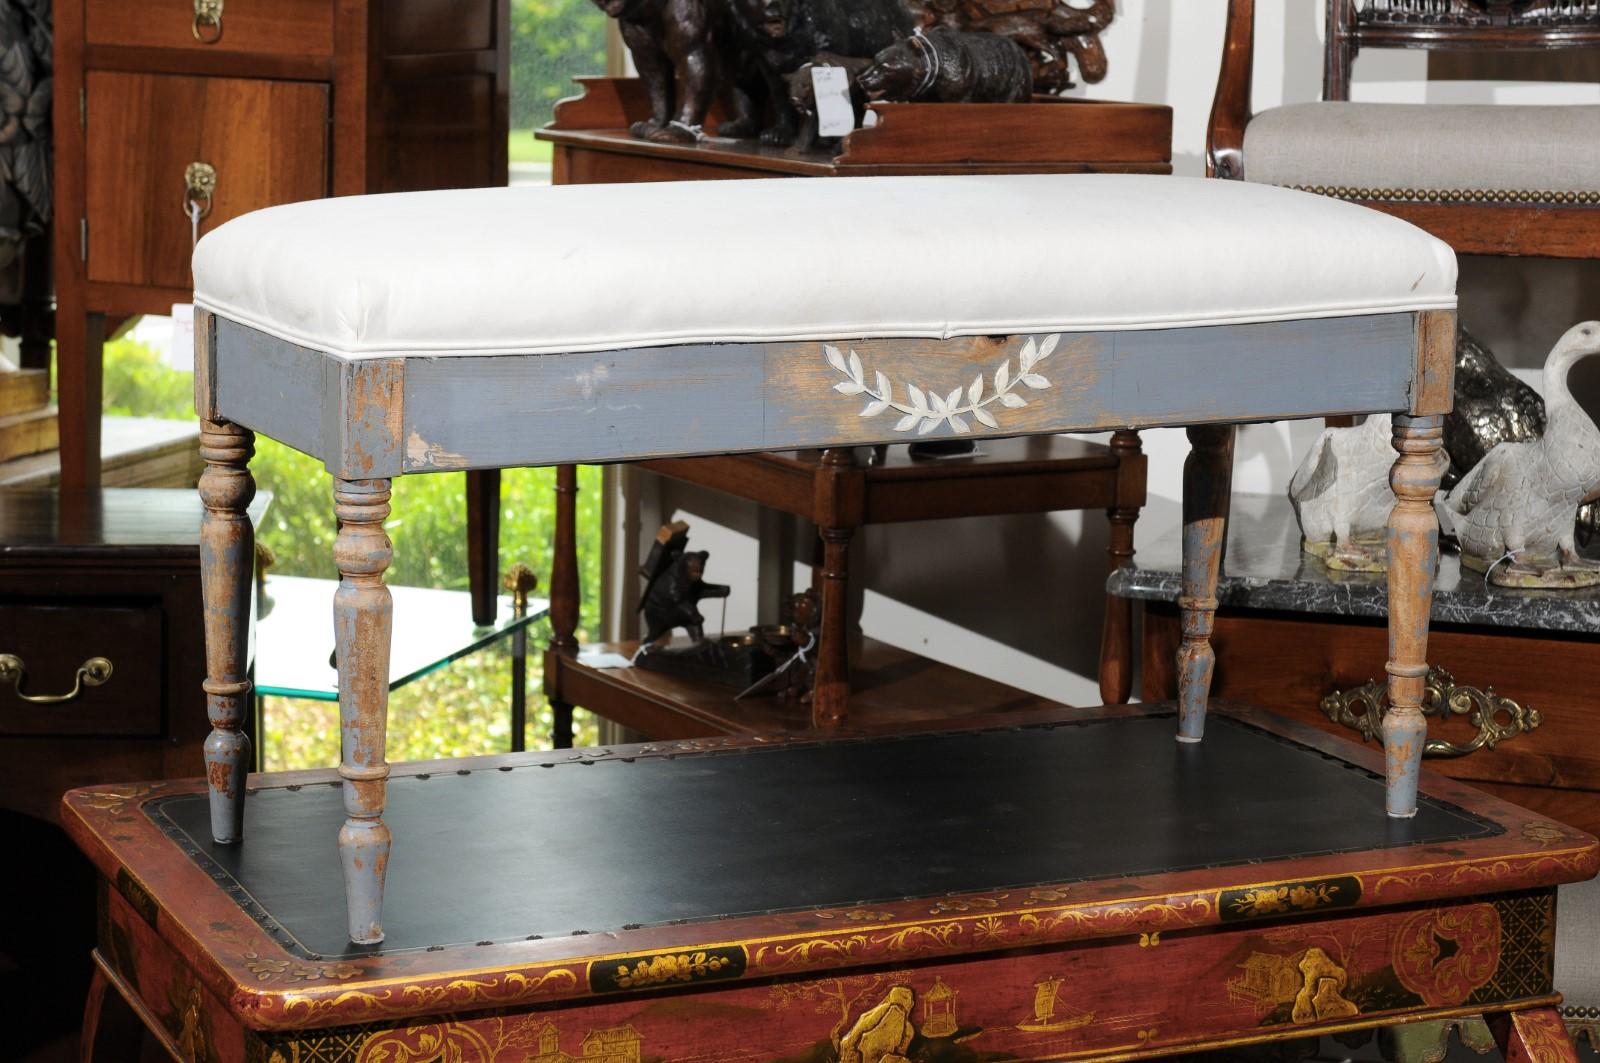 A Swedish neoclassical style painted wood bench from the early 20th century, with laurel wreath accent, cylindrical legs and new upholstery. Born in Sweden during the first quarter of the 20th century, this exquisite neoclassical style painted bench